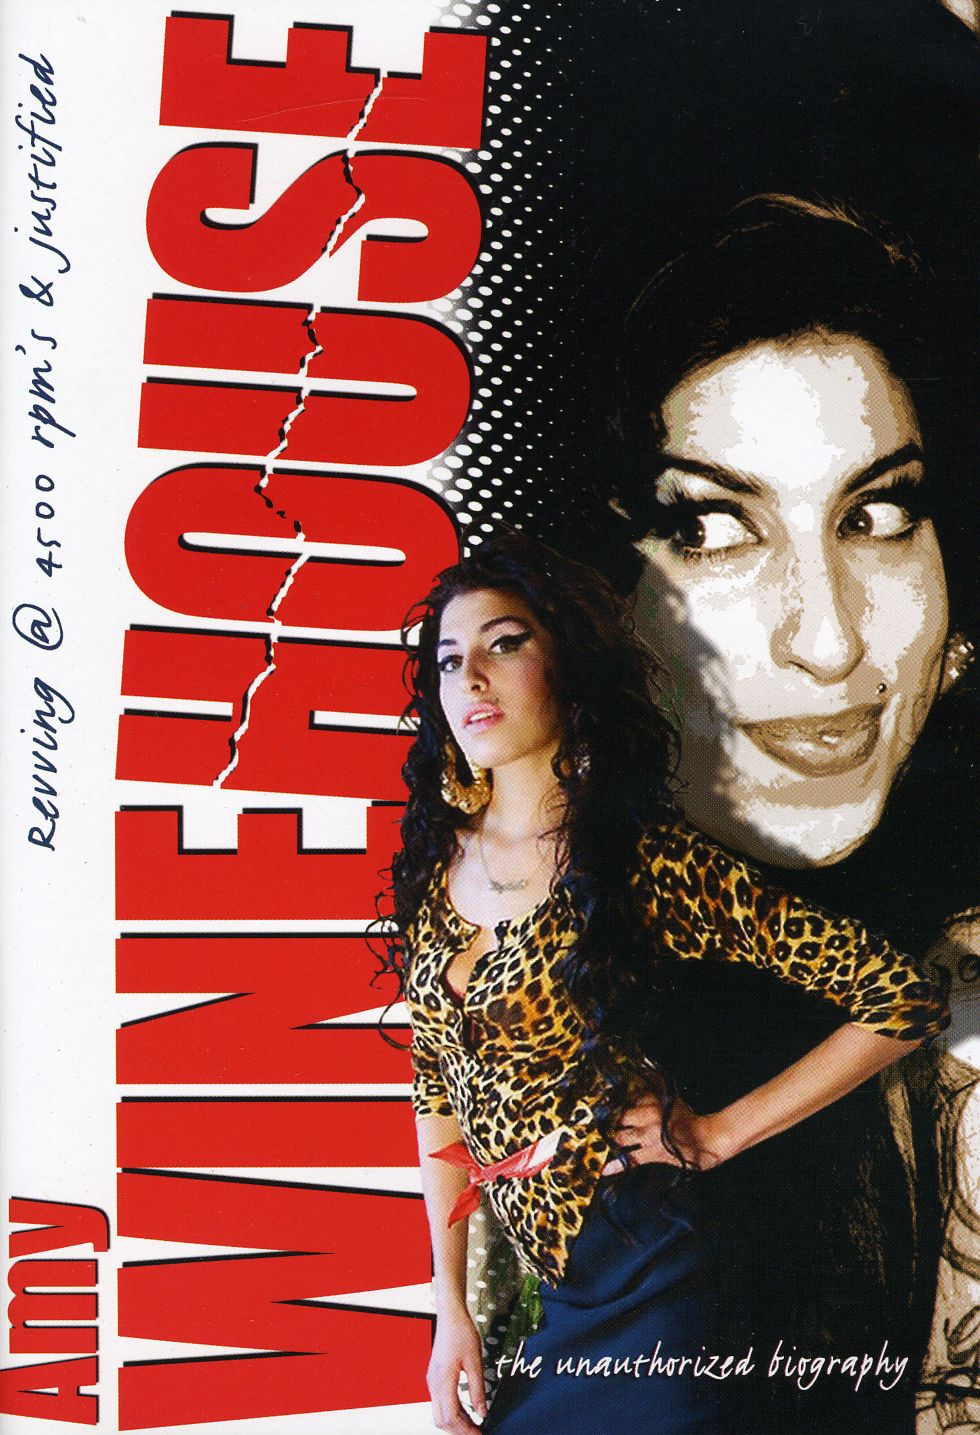 AMY WINEHOUSE: REVVING AT 4500 RPM'S & JUSTIFIED